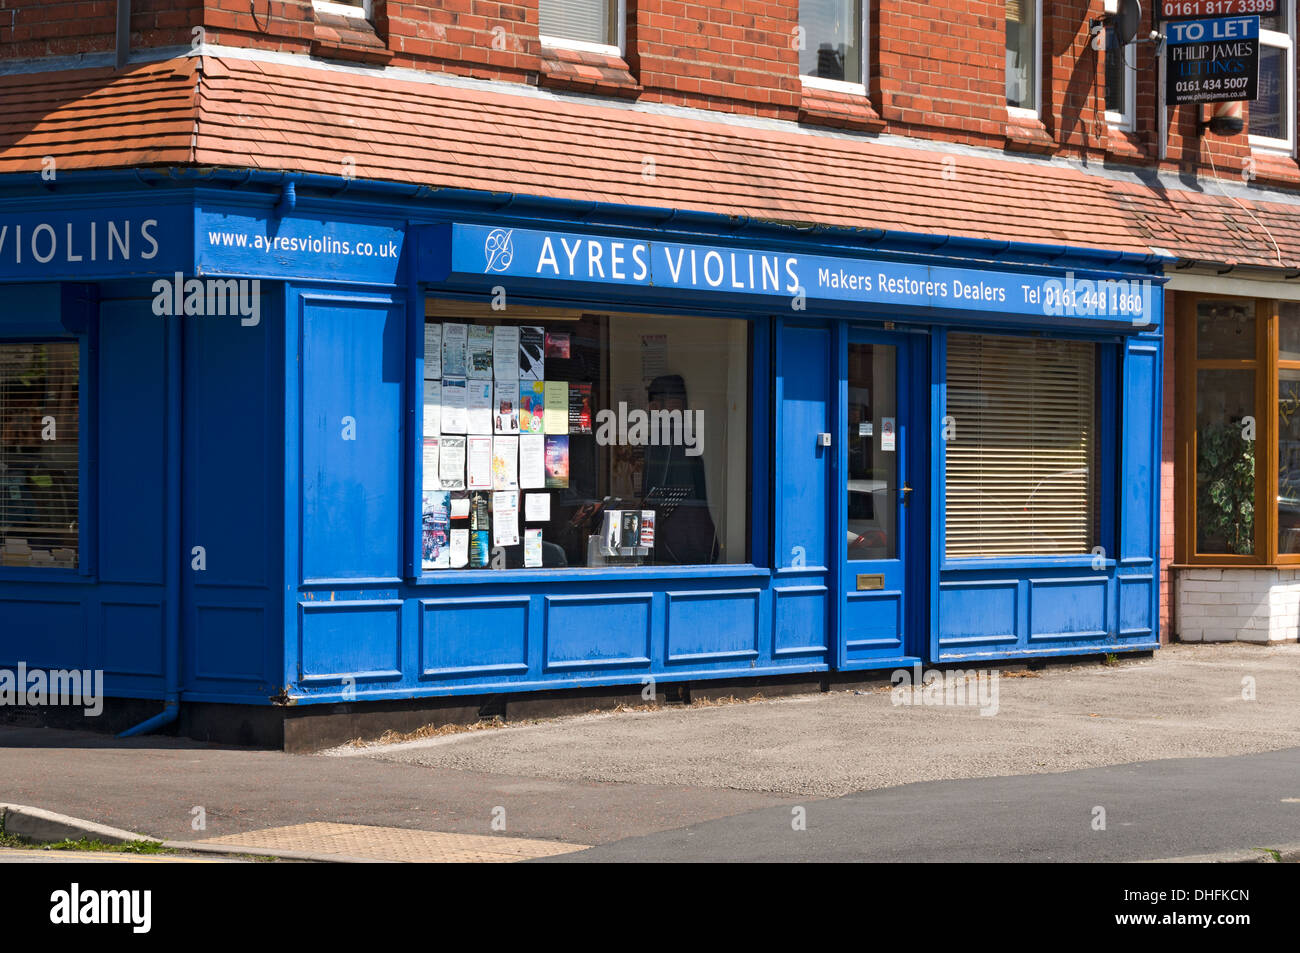 'Ayres Violins' shop front.  School Lane, Didsbury, Manchester, England, UK. Musical instrument makers and repairers. Stock Photo